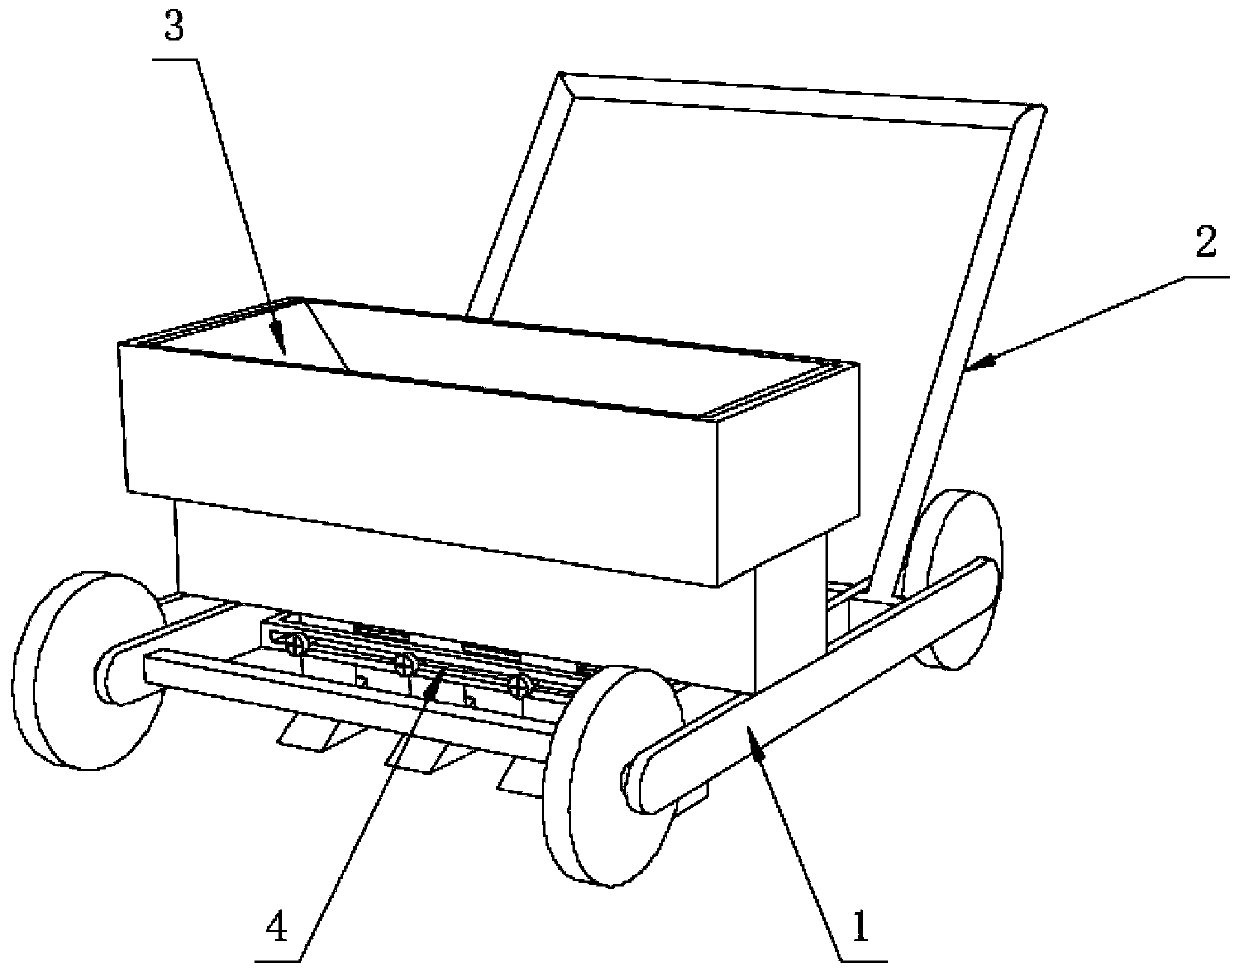 Row-spacing-adjustable type agricultural seeder capable of synchronously sowing in multiple rows